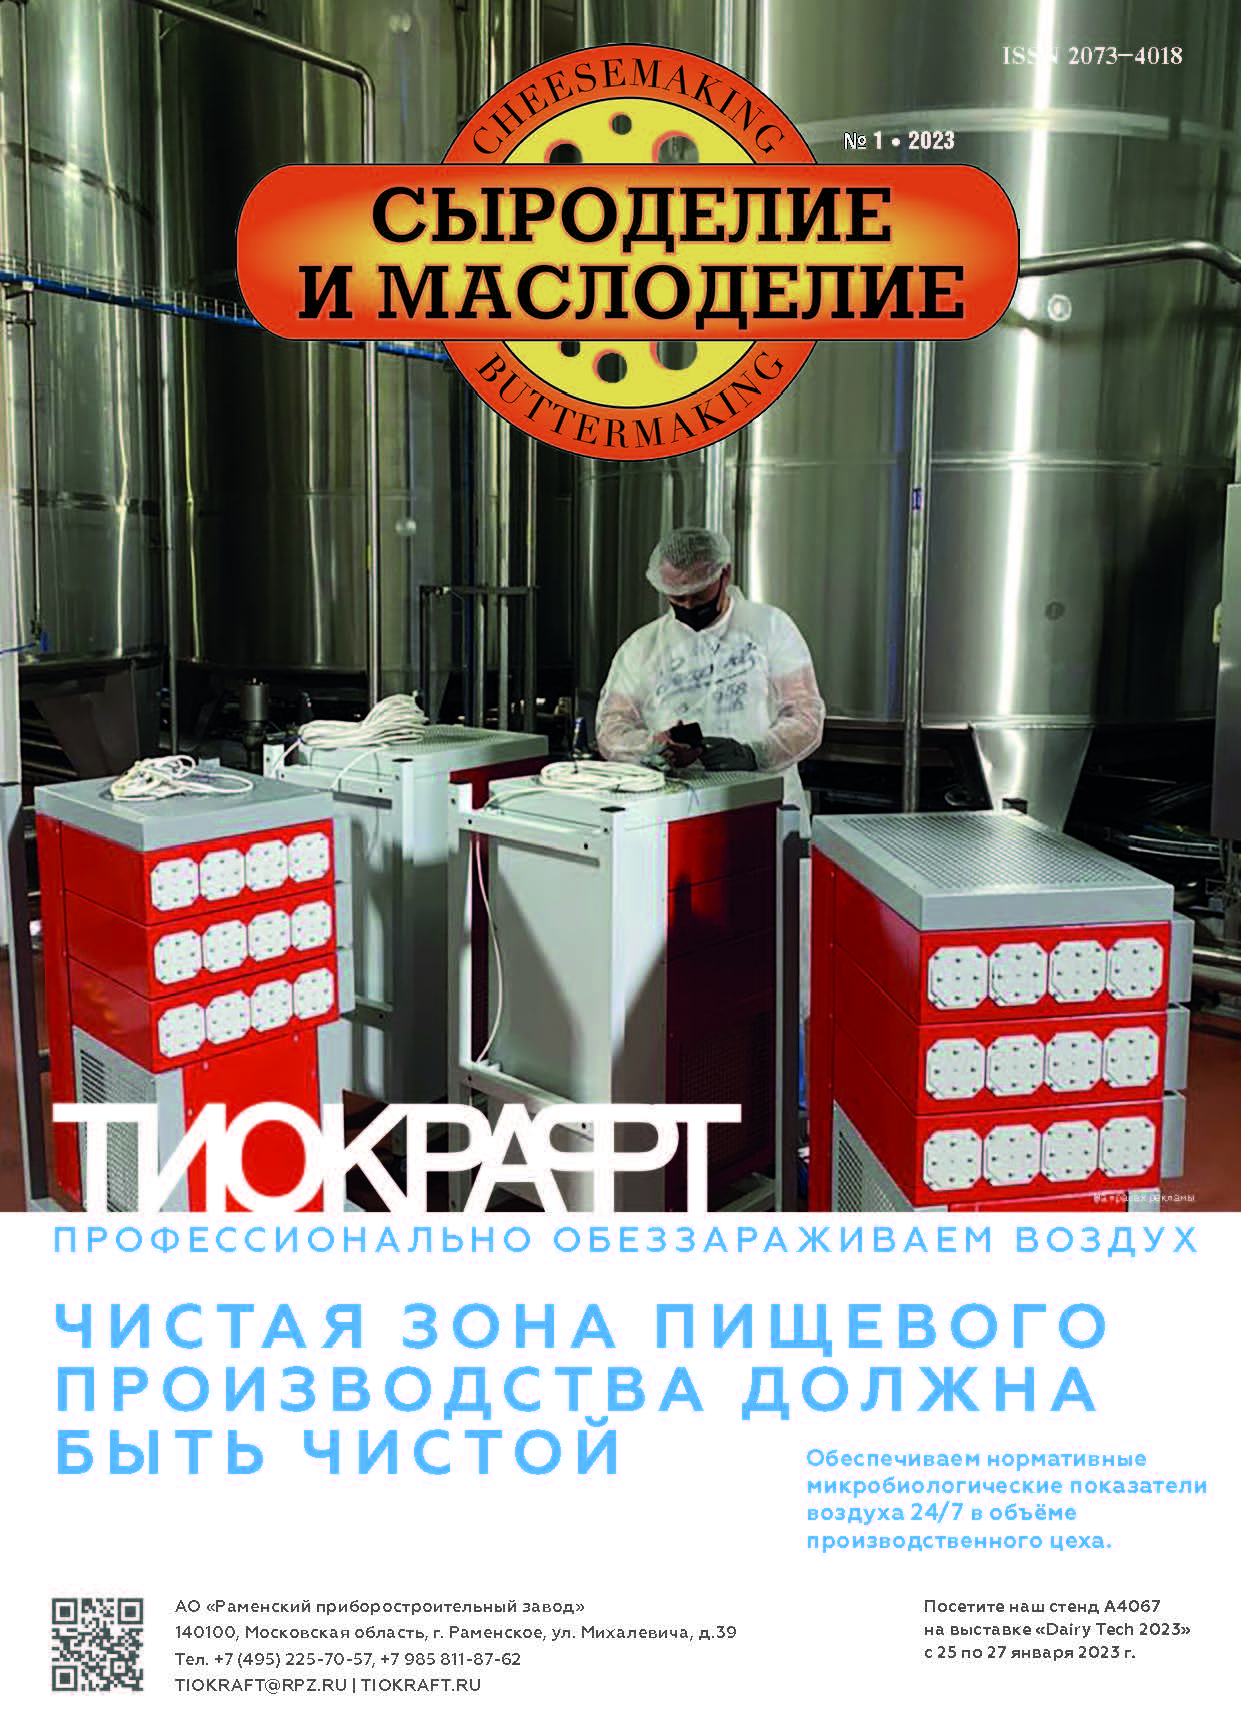                         Sanitary treatment of cheese molds with the use of a new line of preparations
            